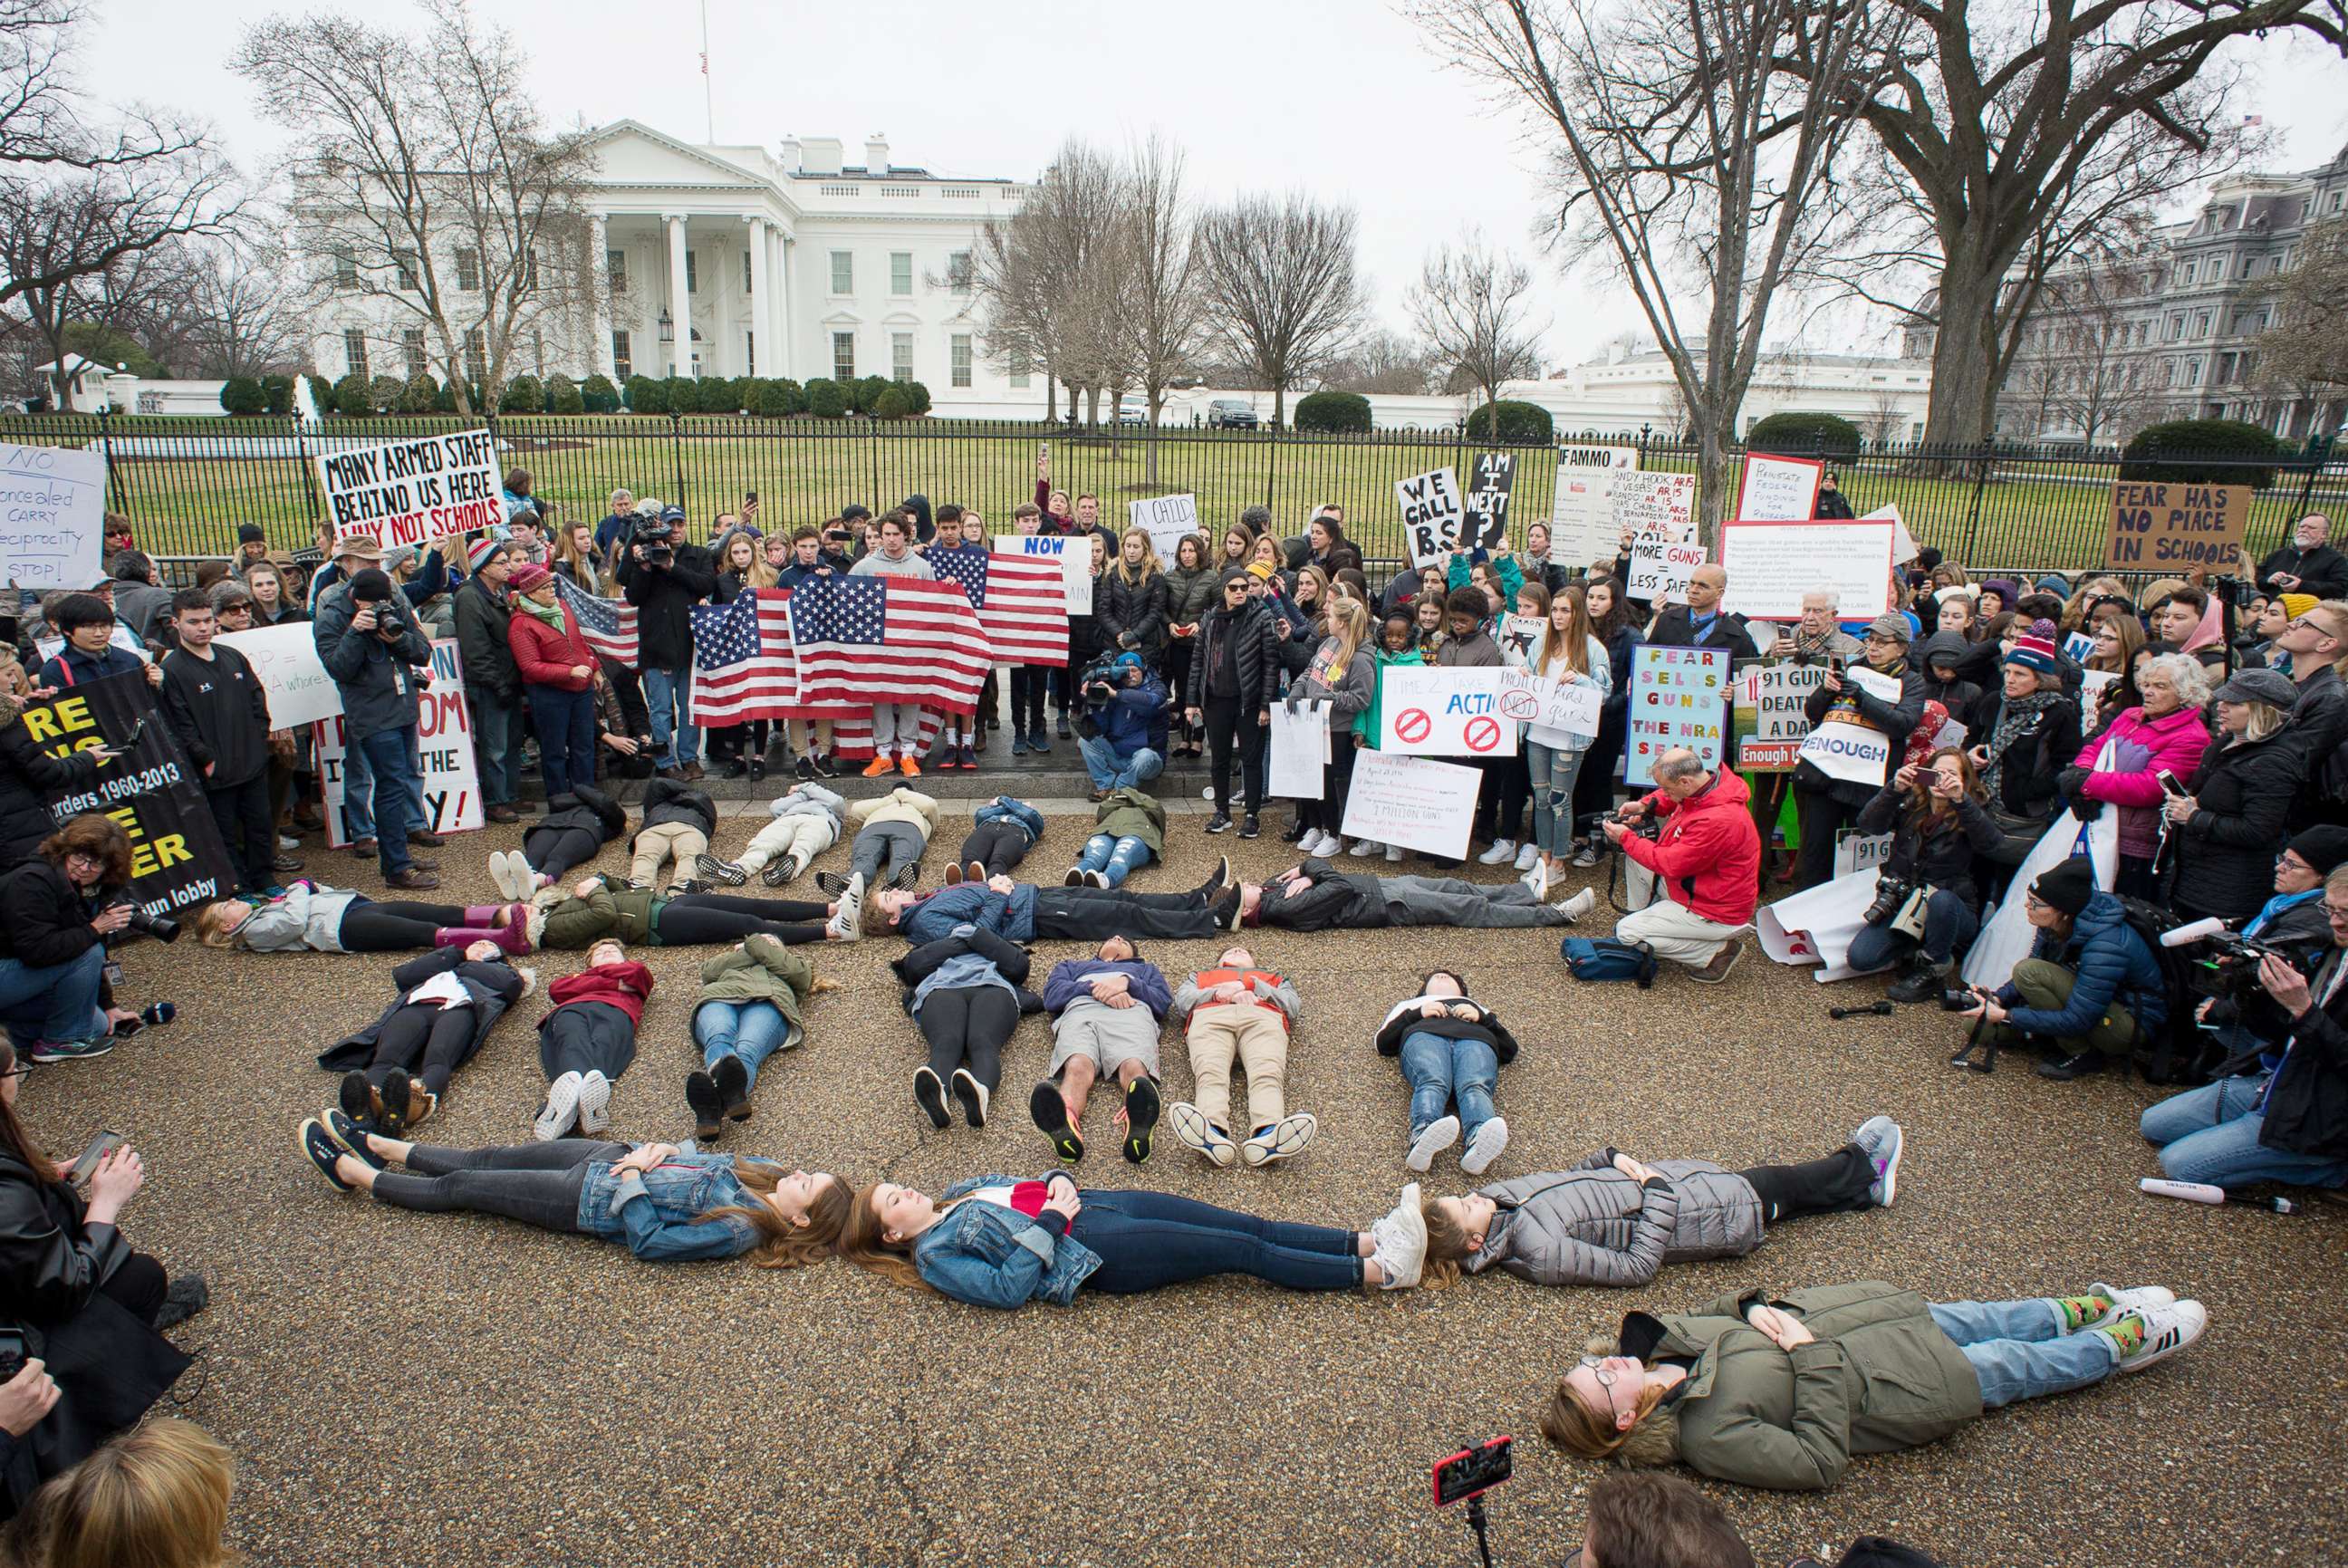 PHOTO: Students stage a "lie-in" outside the White House on Feb. 19, 2018, to demand gun control legislation in the wake of the school shooting that took place in Parkland, Fla. 